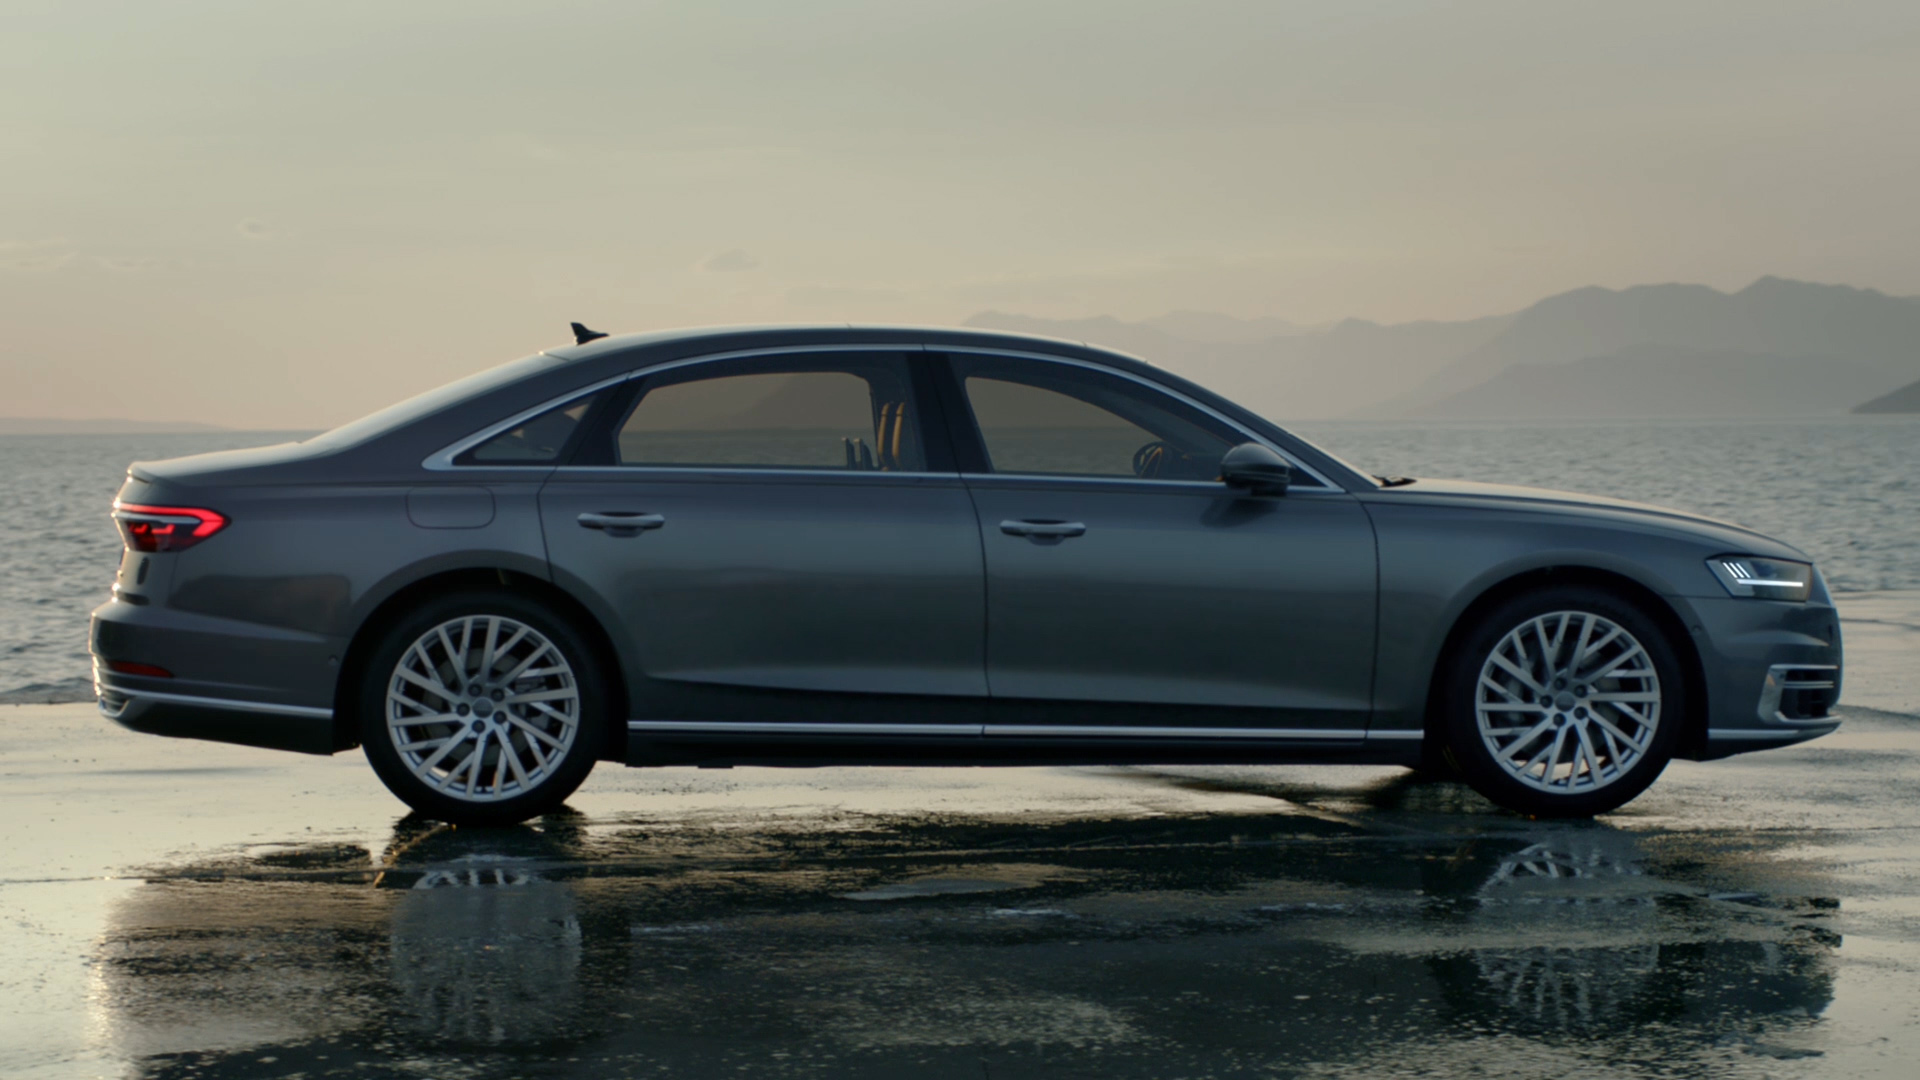 The new Audi A8 L, side view.